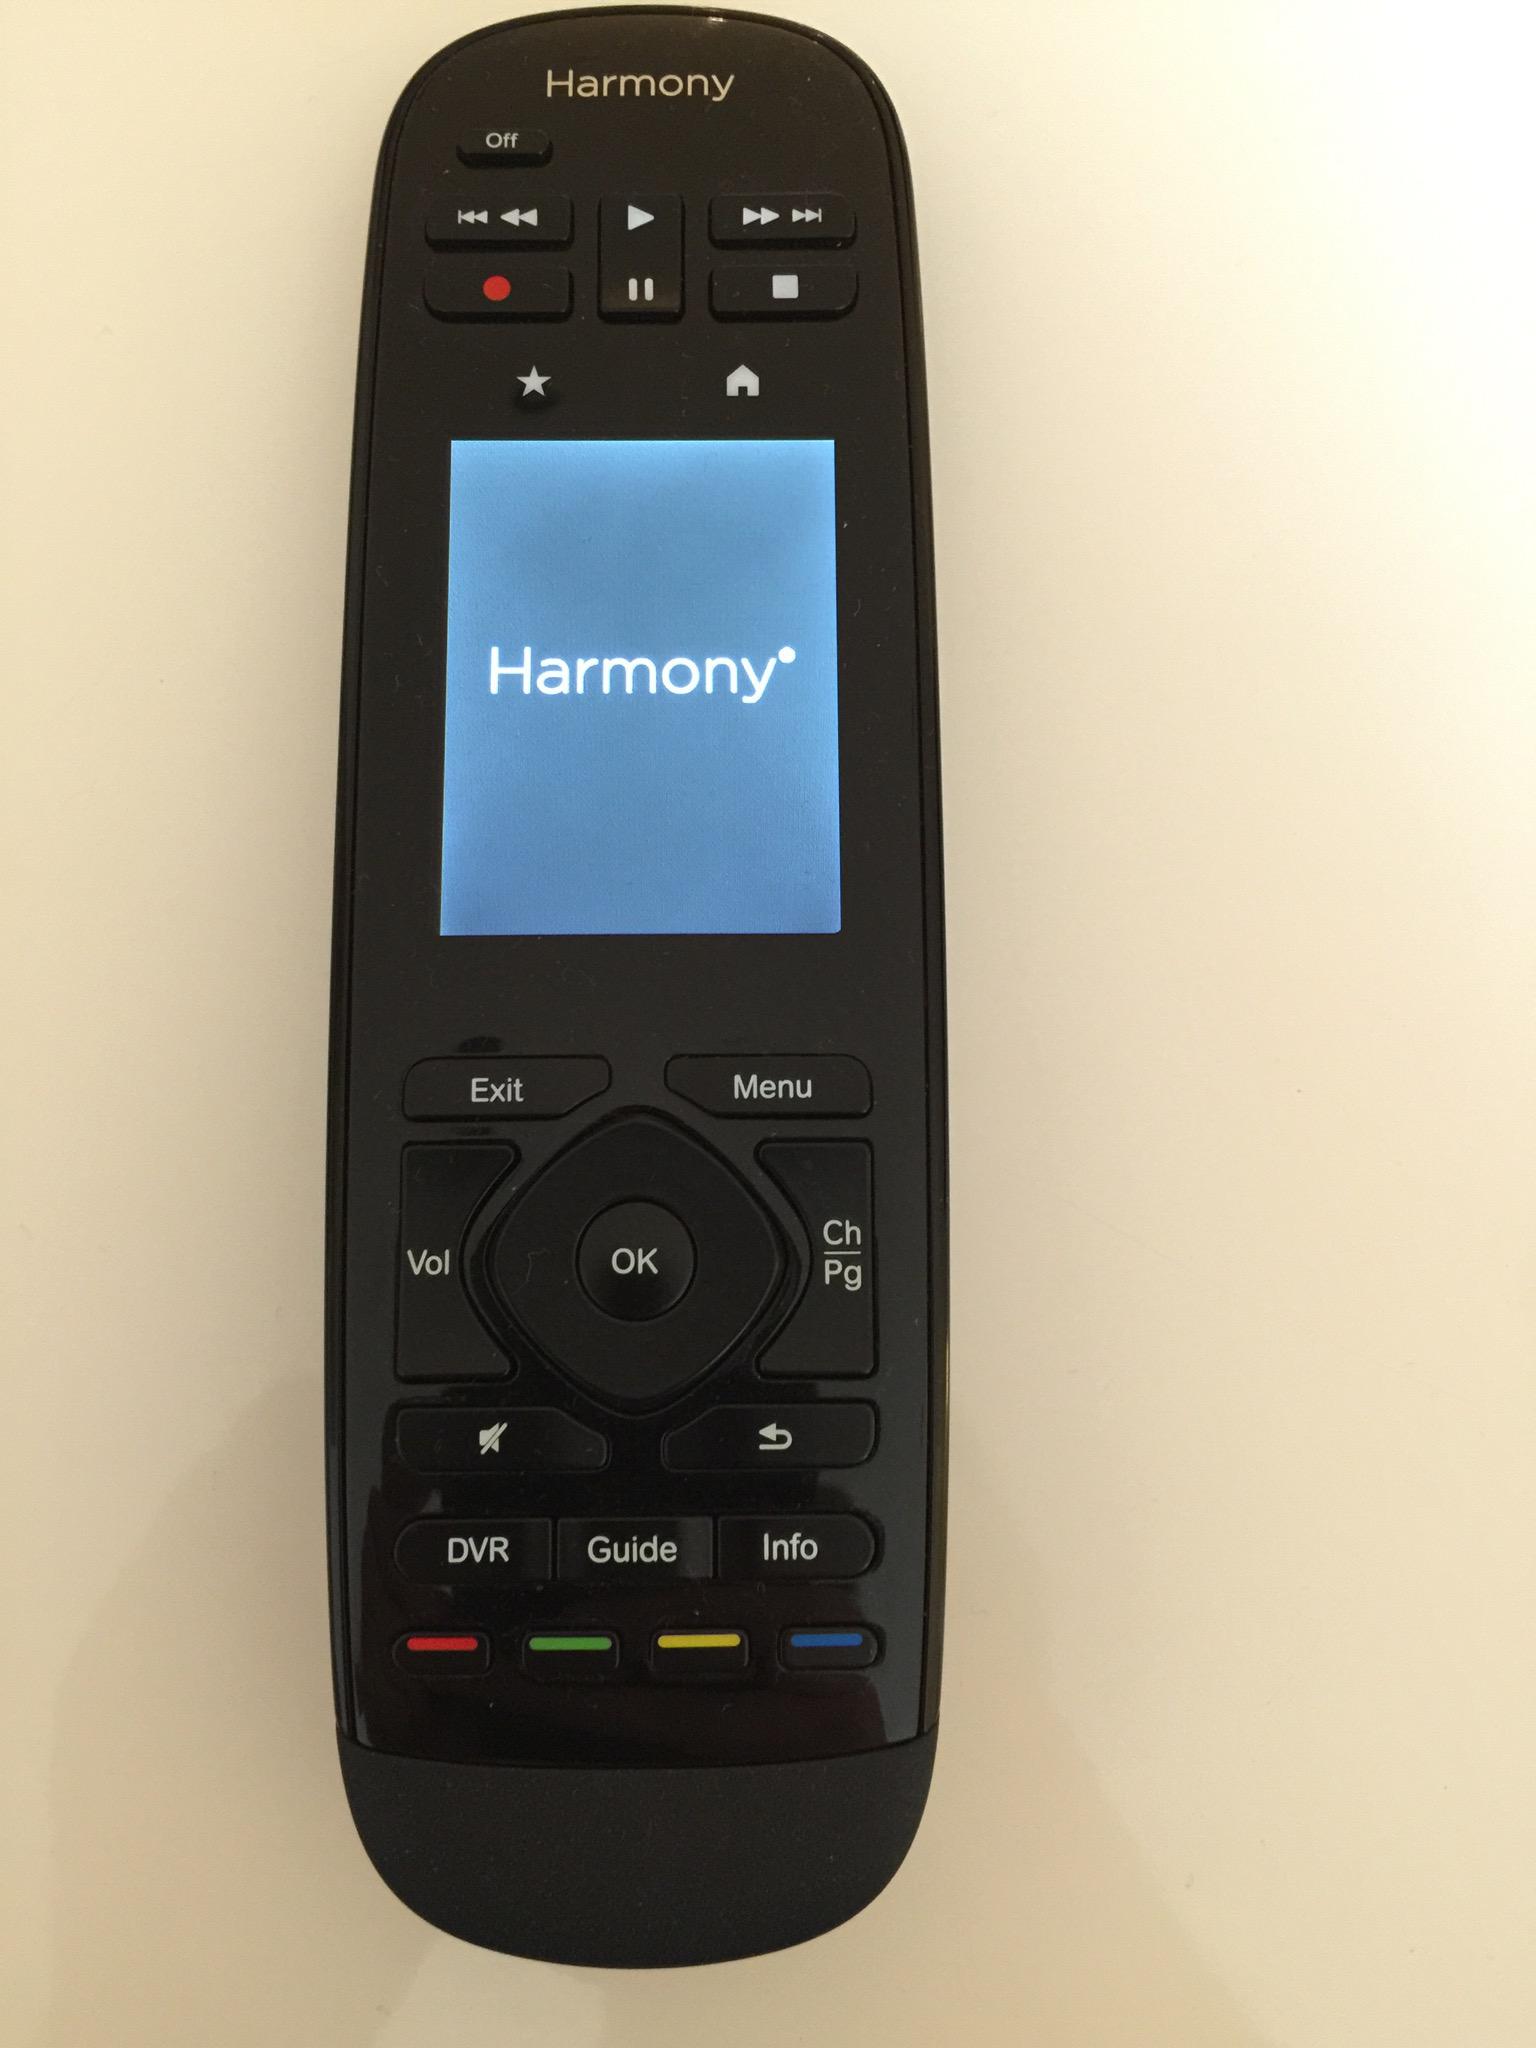 How to reset the harmony remote - B+C Guides